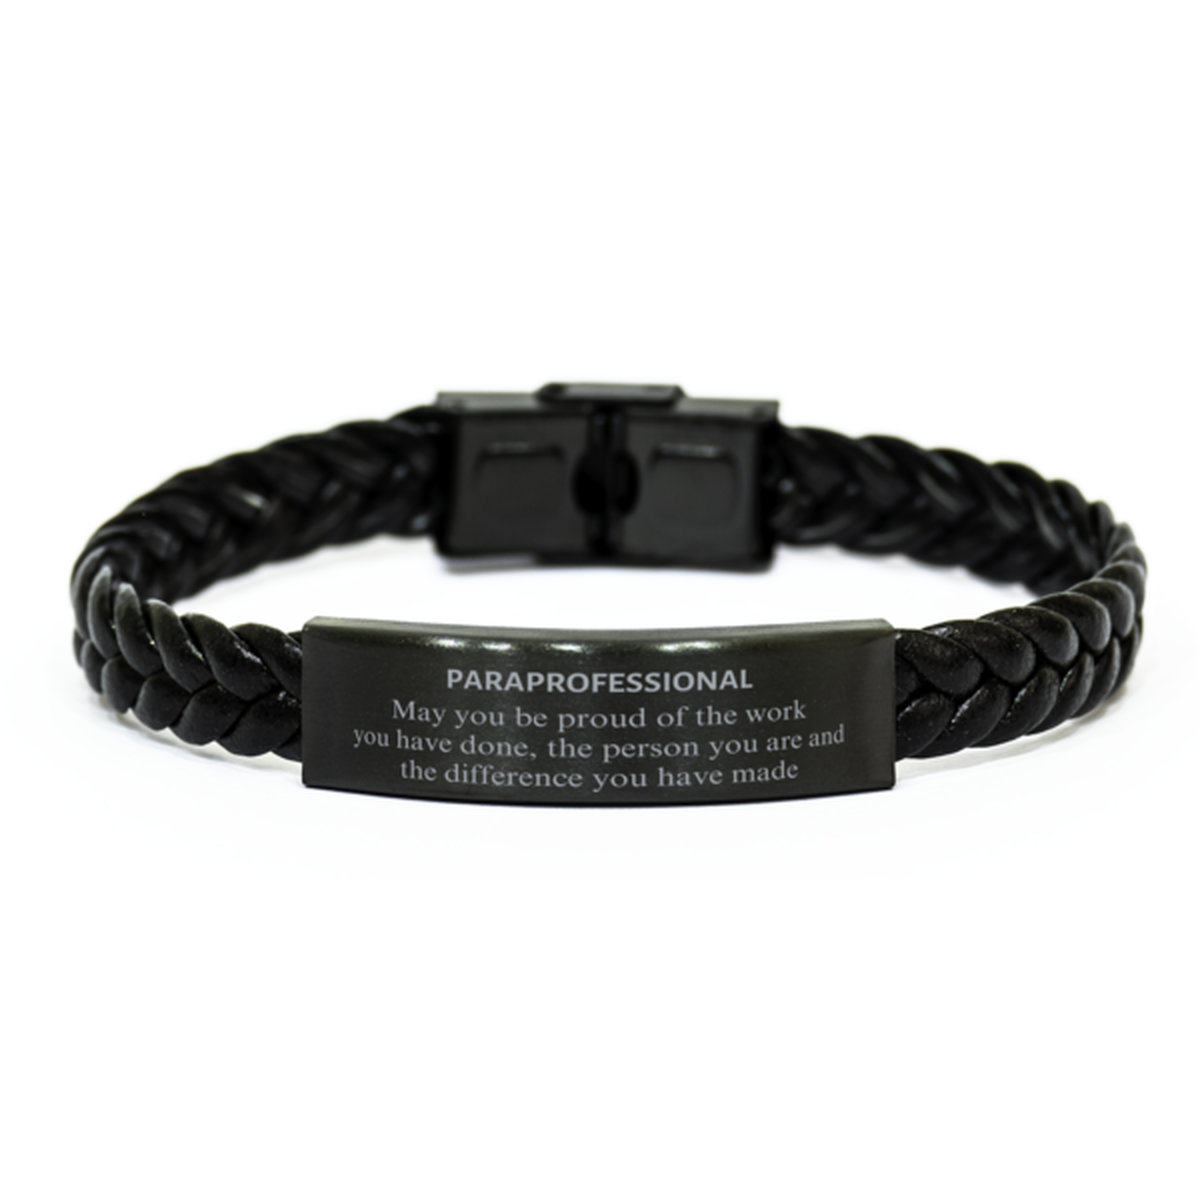 Paraprofessional May you be proud of the work you have done, Retirement Paraprofessional Braided Leather Bracelet for Colleague Appreciation Gifts Amazing for Paraprofessional